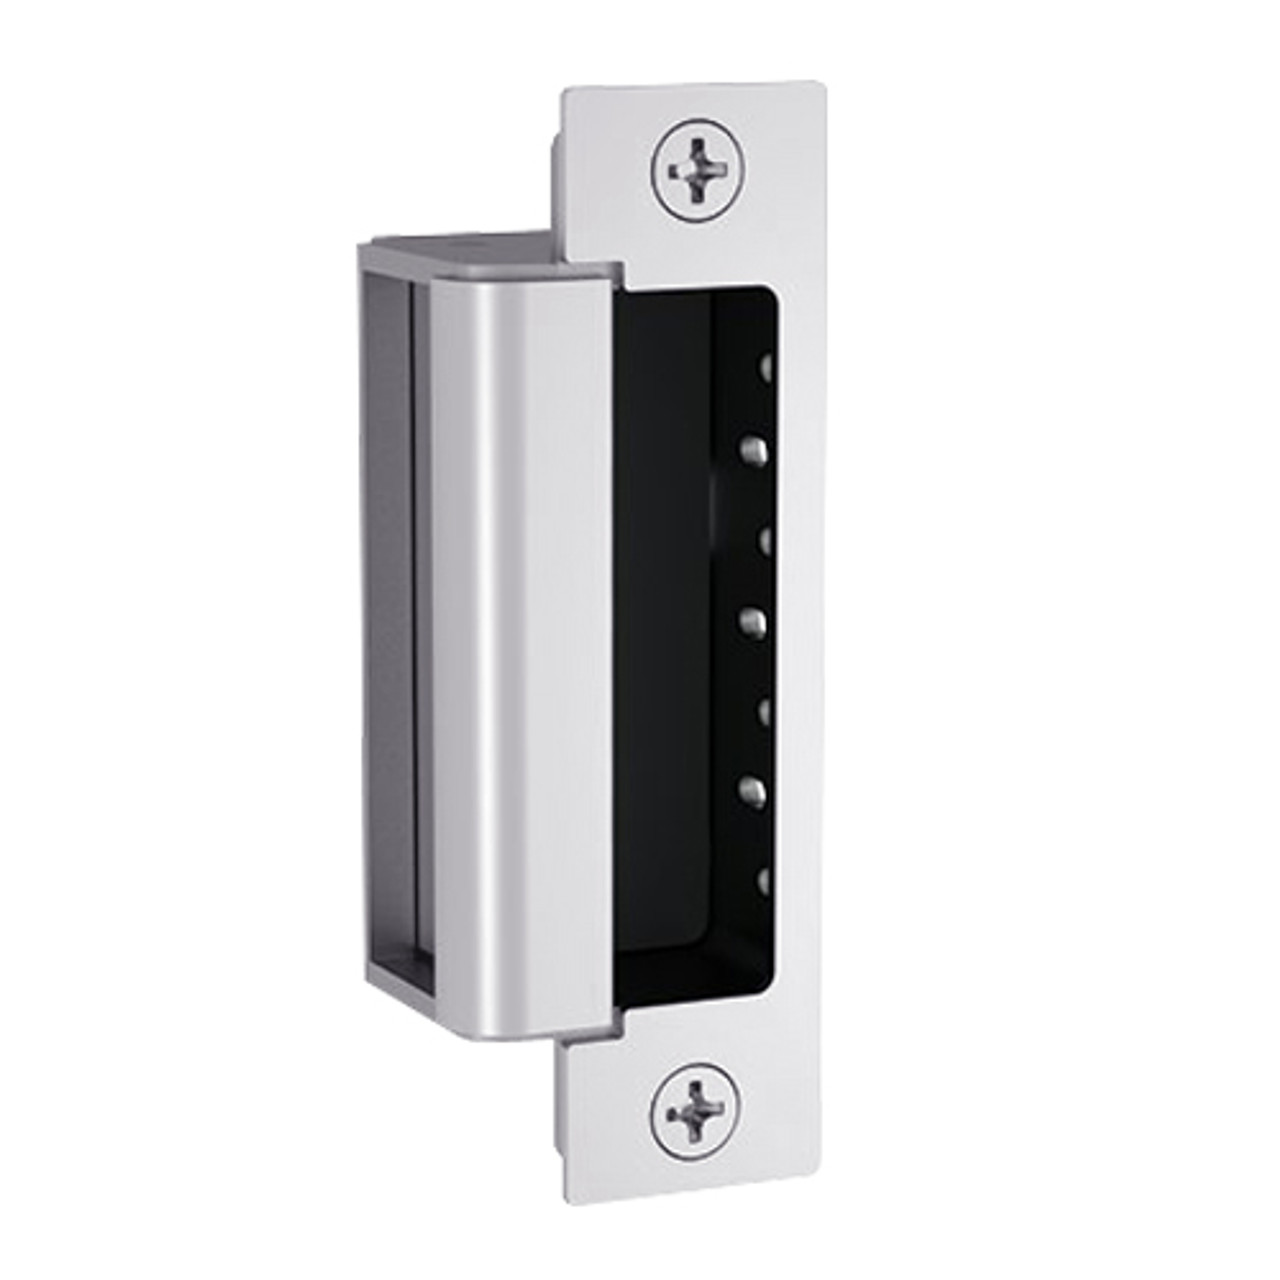 1600-CS-DLMS-629 Hes 1600 Series Dynamic Complete Low Profile Electric Strike for Latchbolt and Deadbolt Lock with Dual Lock Monitor & Strike Monitor in Bright Stainless Steel